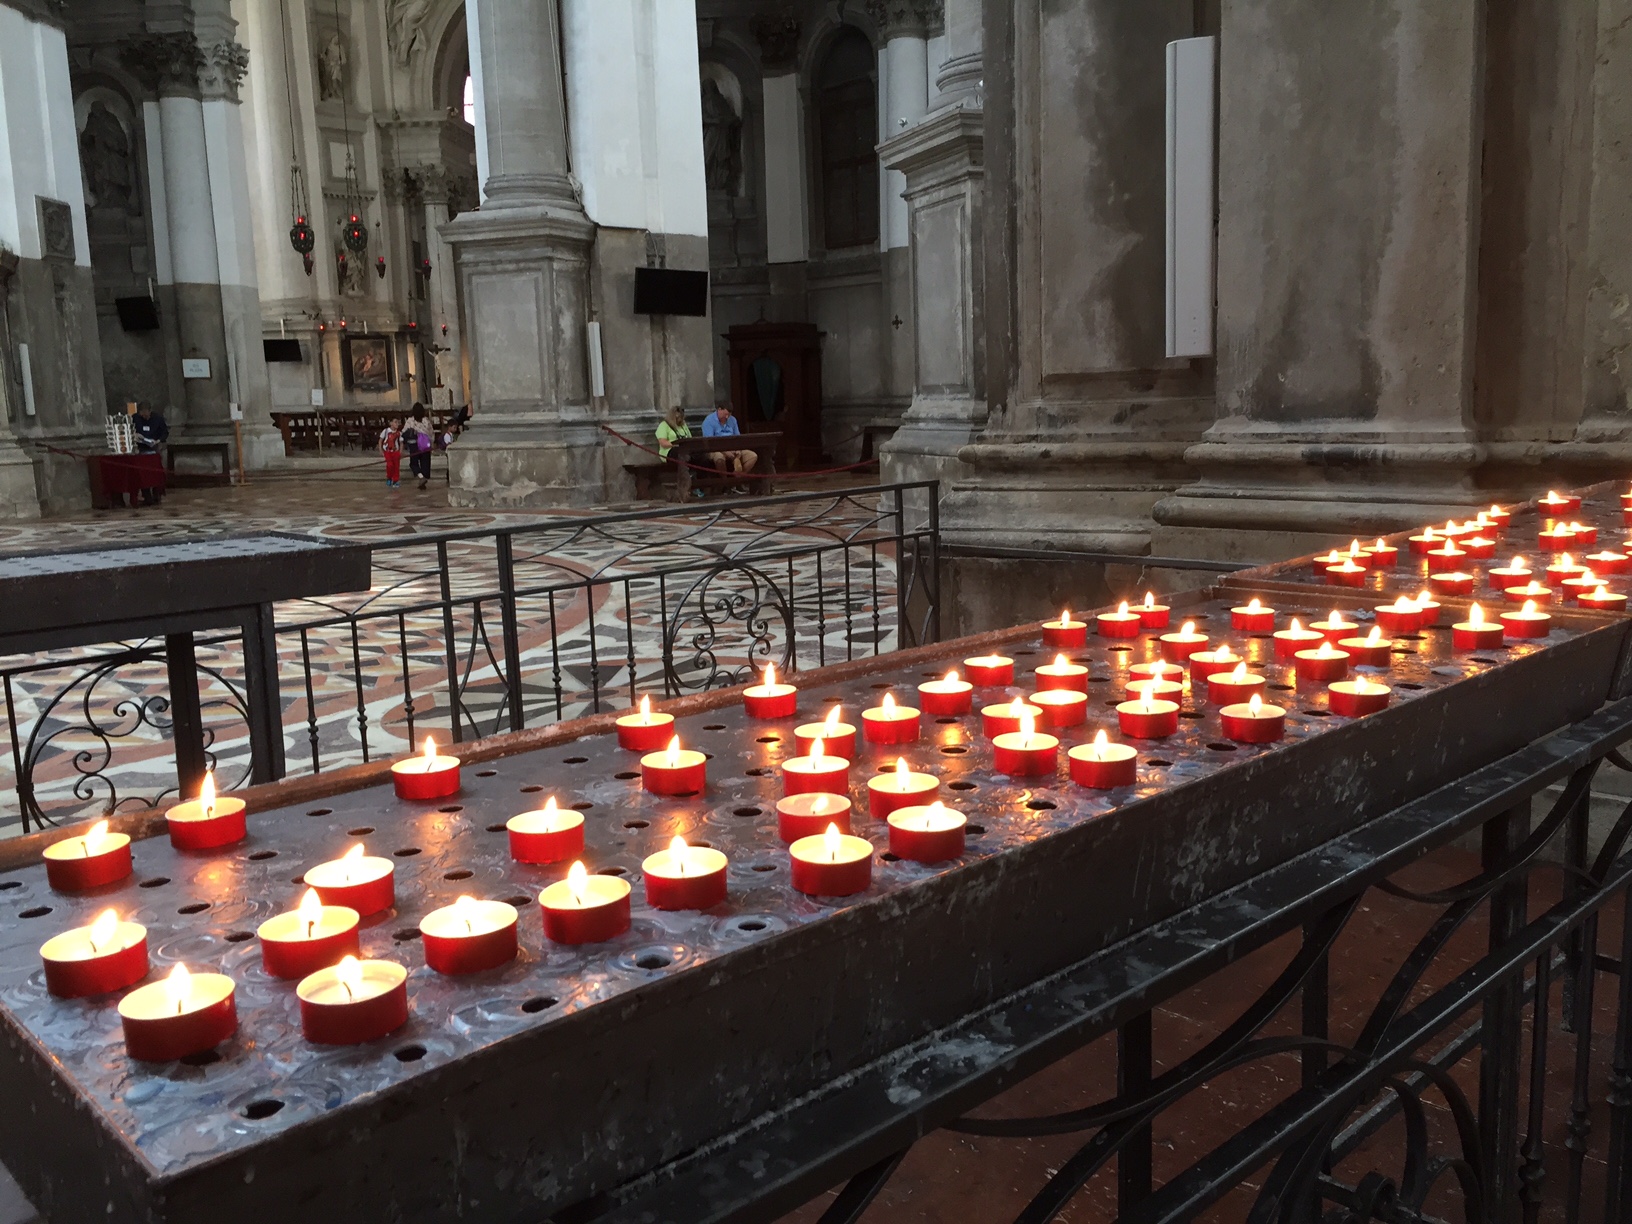 Venice: Lighting a Candle for Diddley.